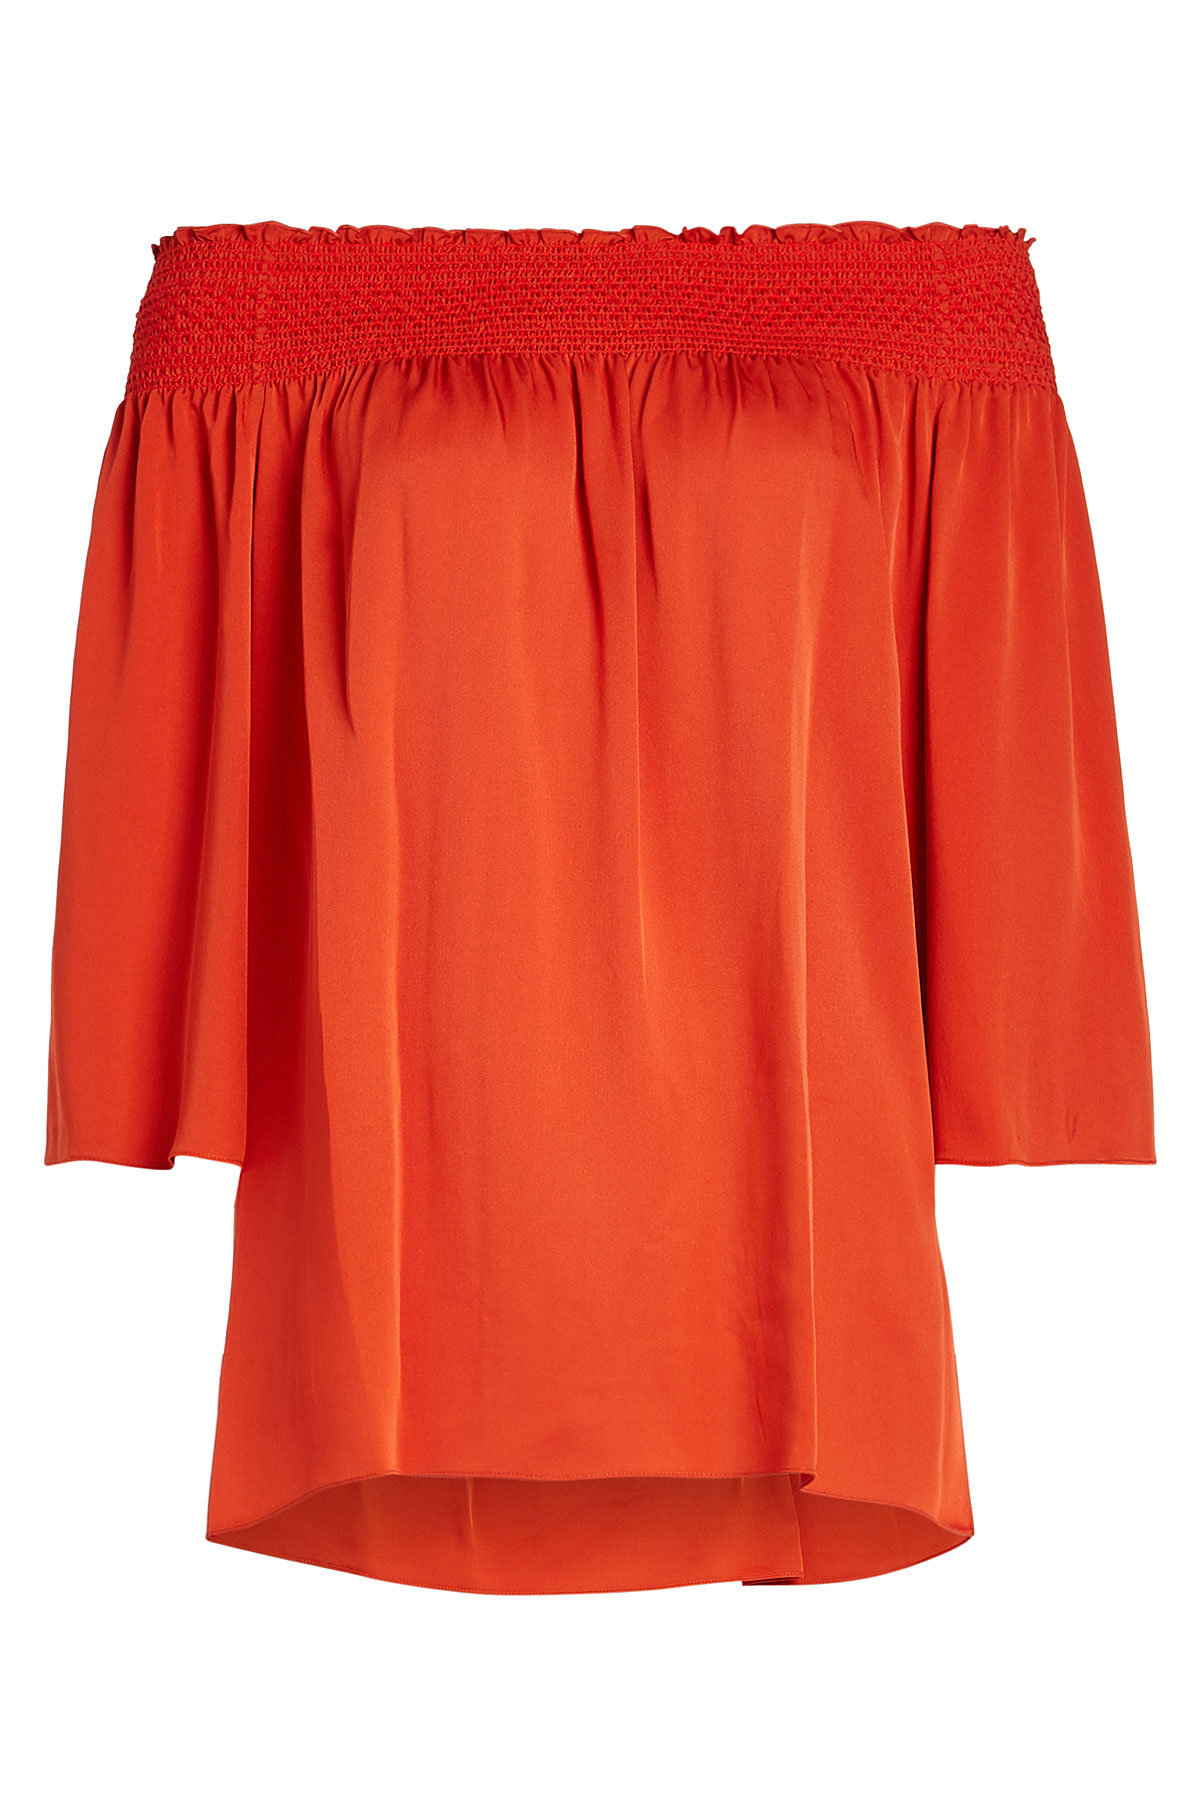 Theory - Off-The-Shoulder Silk Tunic